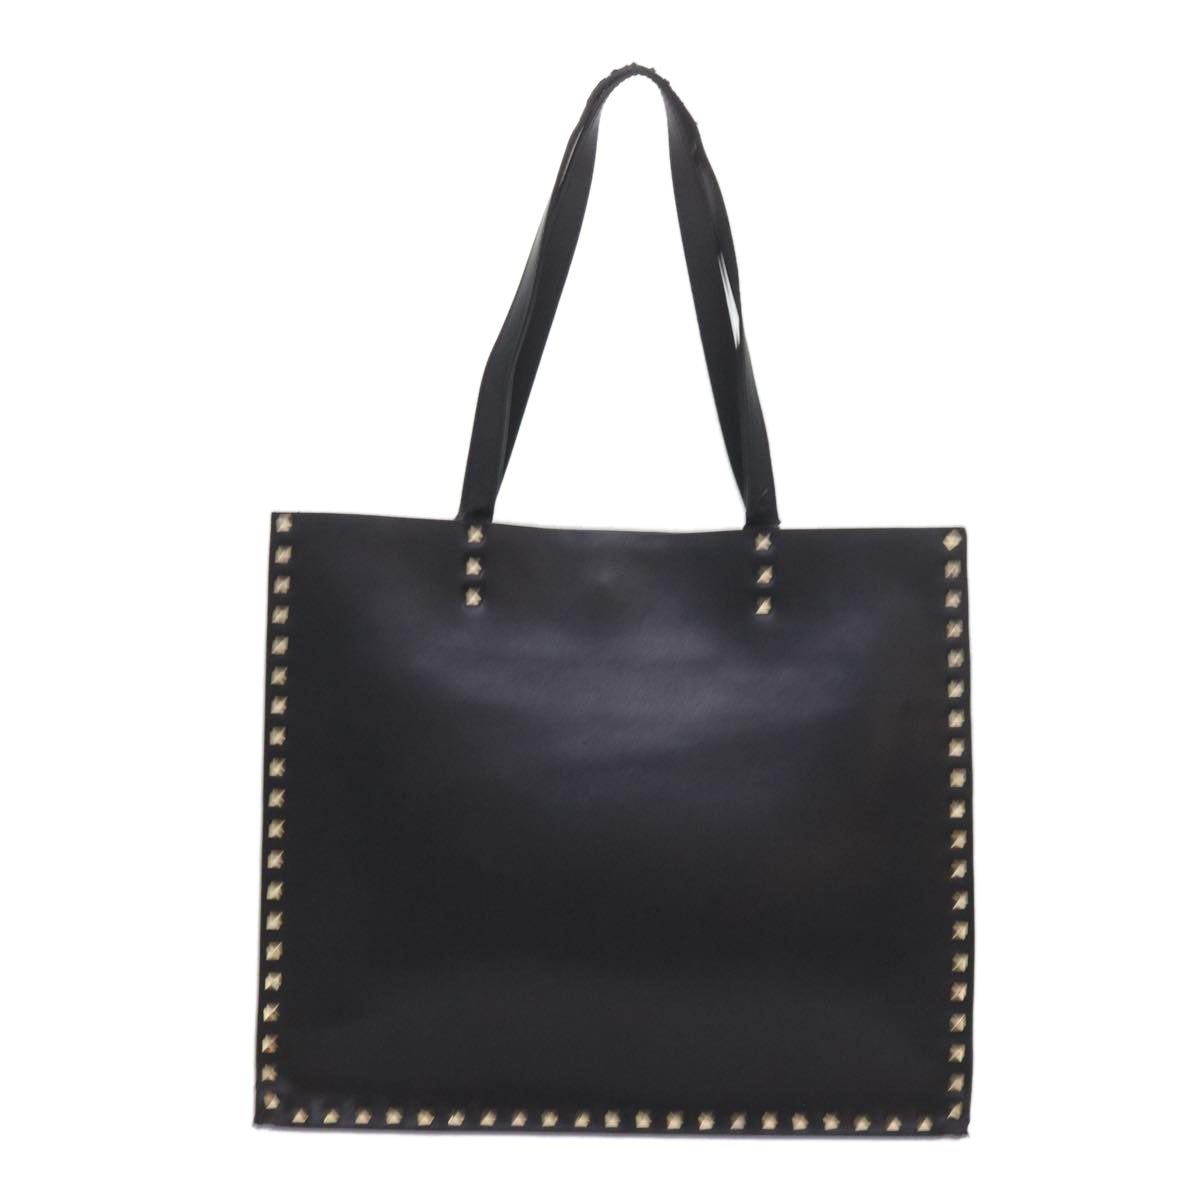 VALENTINO Tote Bag Leather Black Auth bs8764